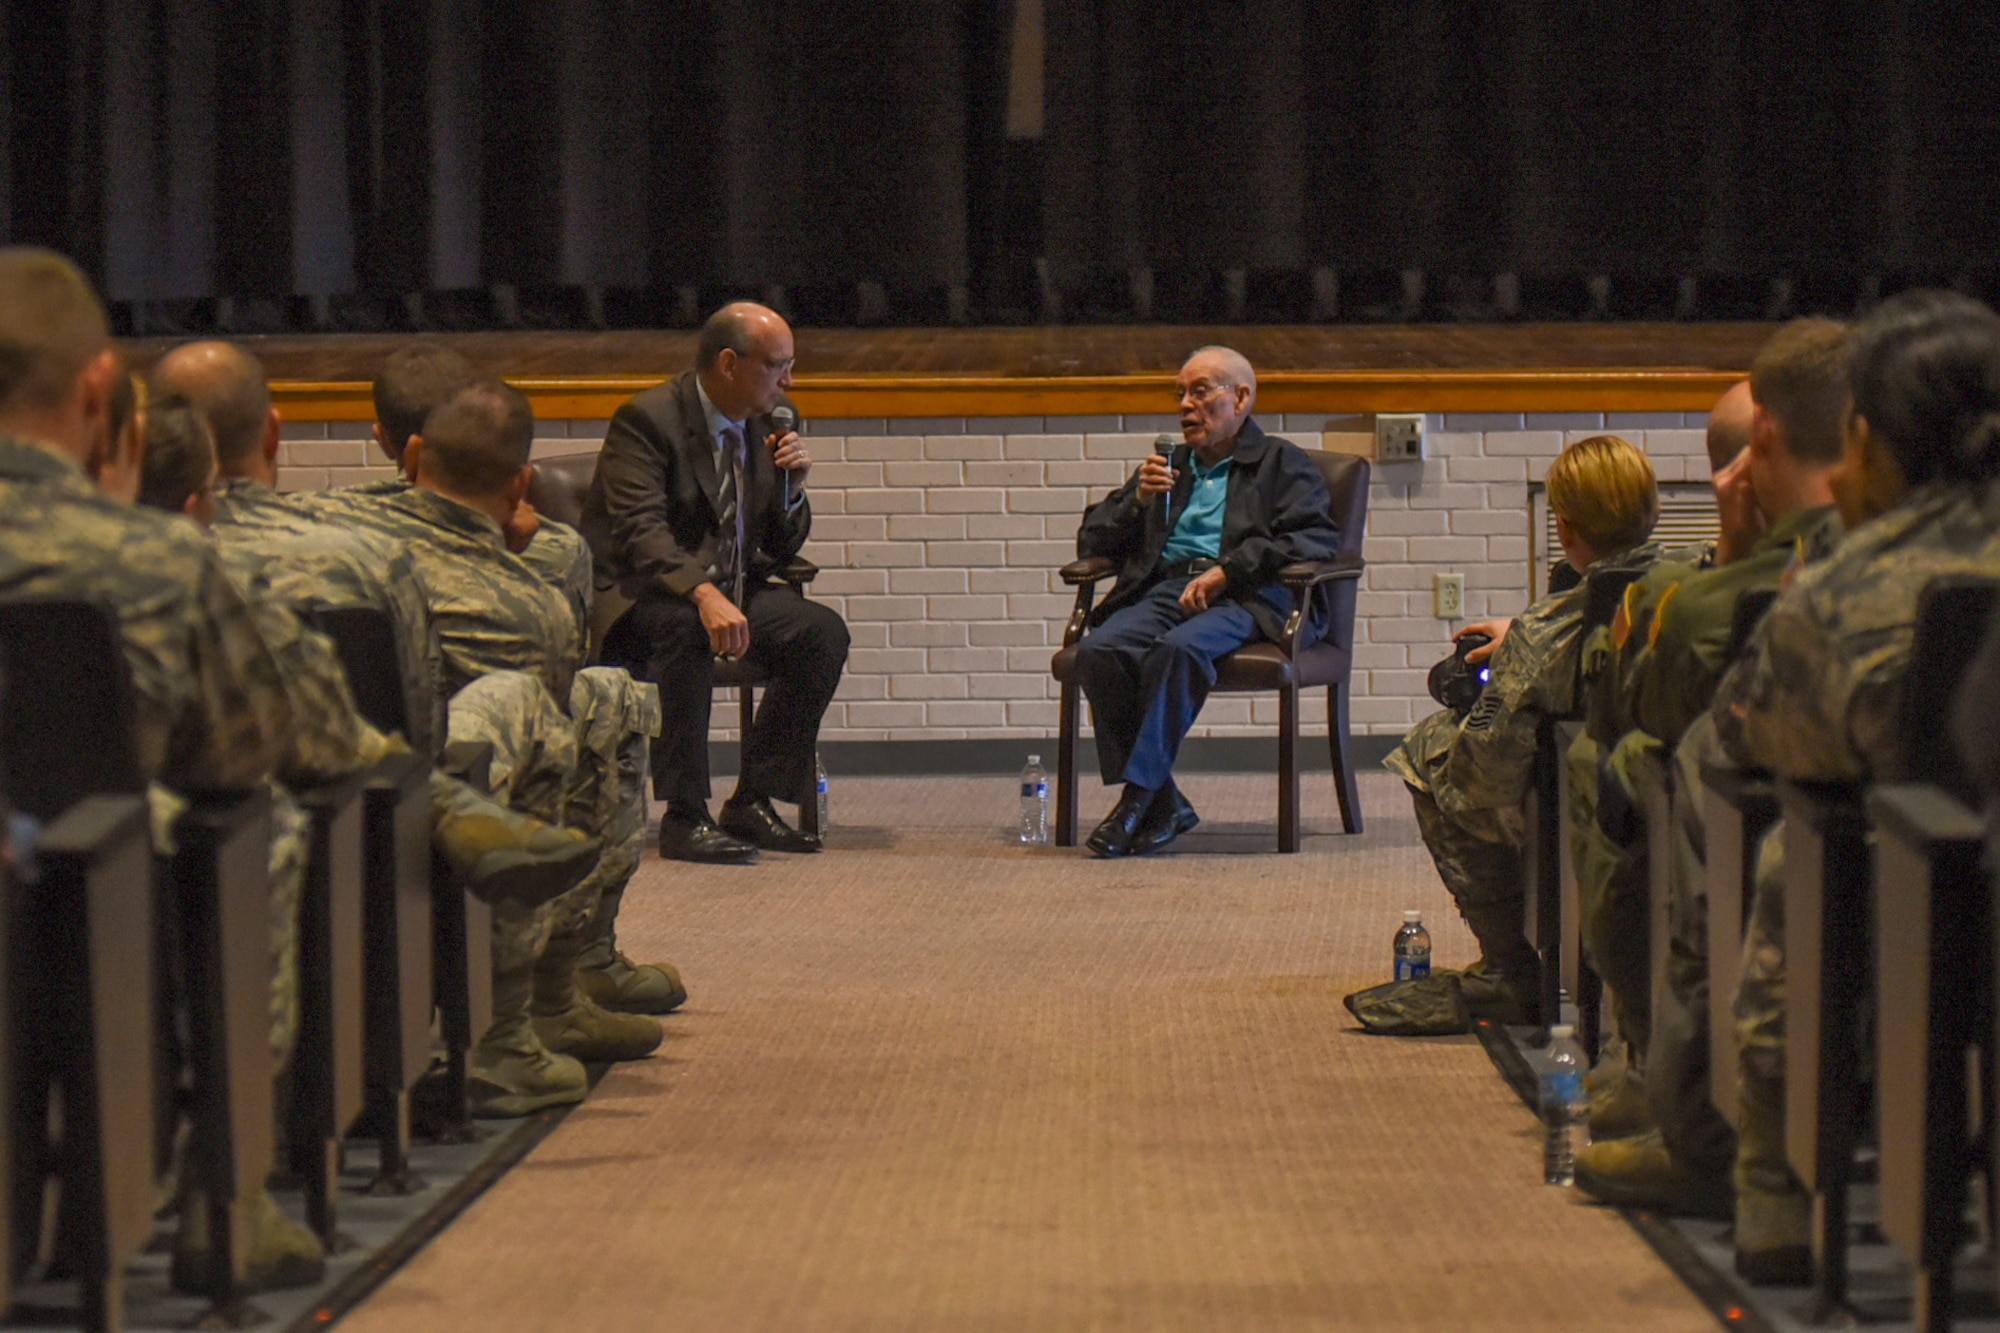 Eddie Graham, right, retired Army sergeant, speaks to Airmen at McConnell Air Force Base, Kan., Oct. 20, 2016. Graham gave a speech about how his experiences during World War II and surviving the Bataan Death March. (U.S. Air Force photo/Senior Airman Christopher Thornbury)